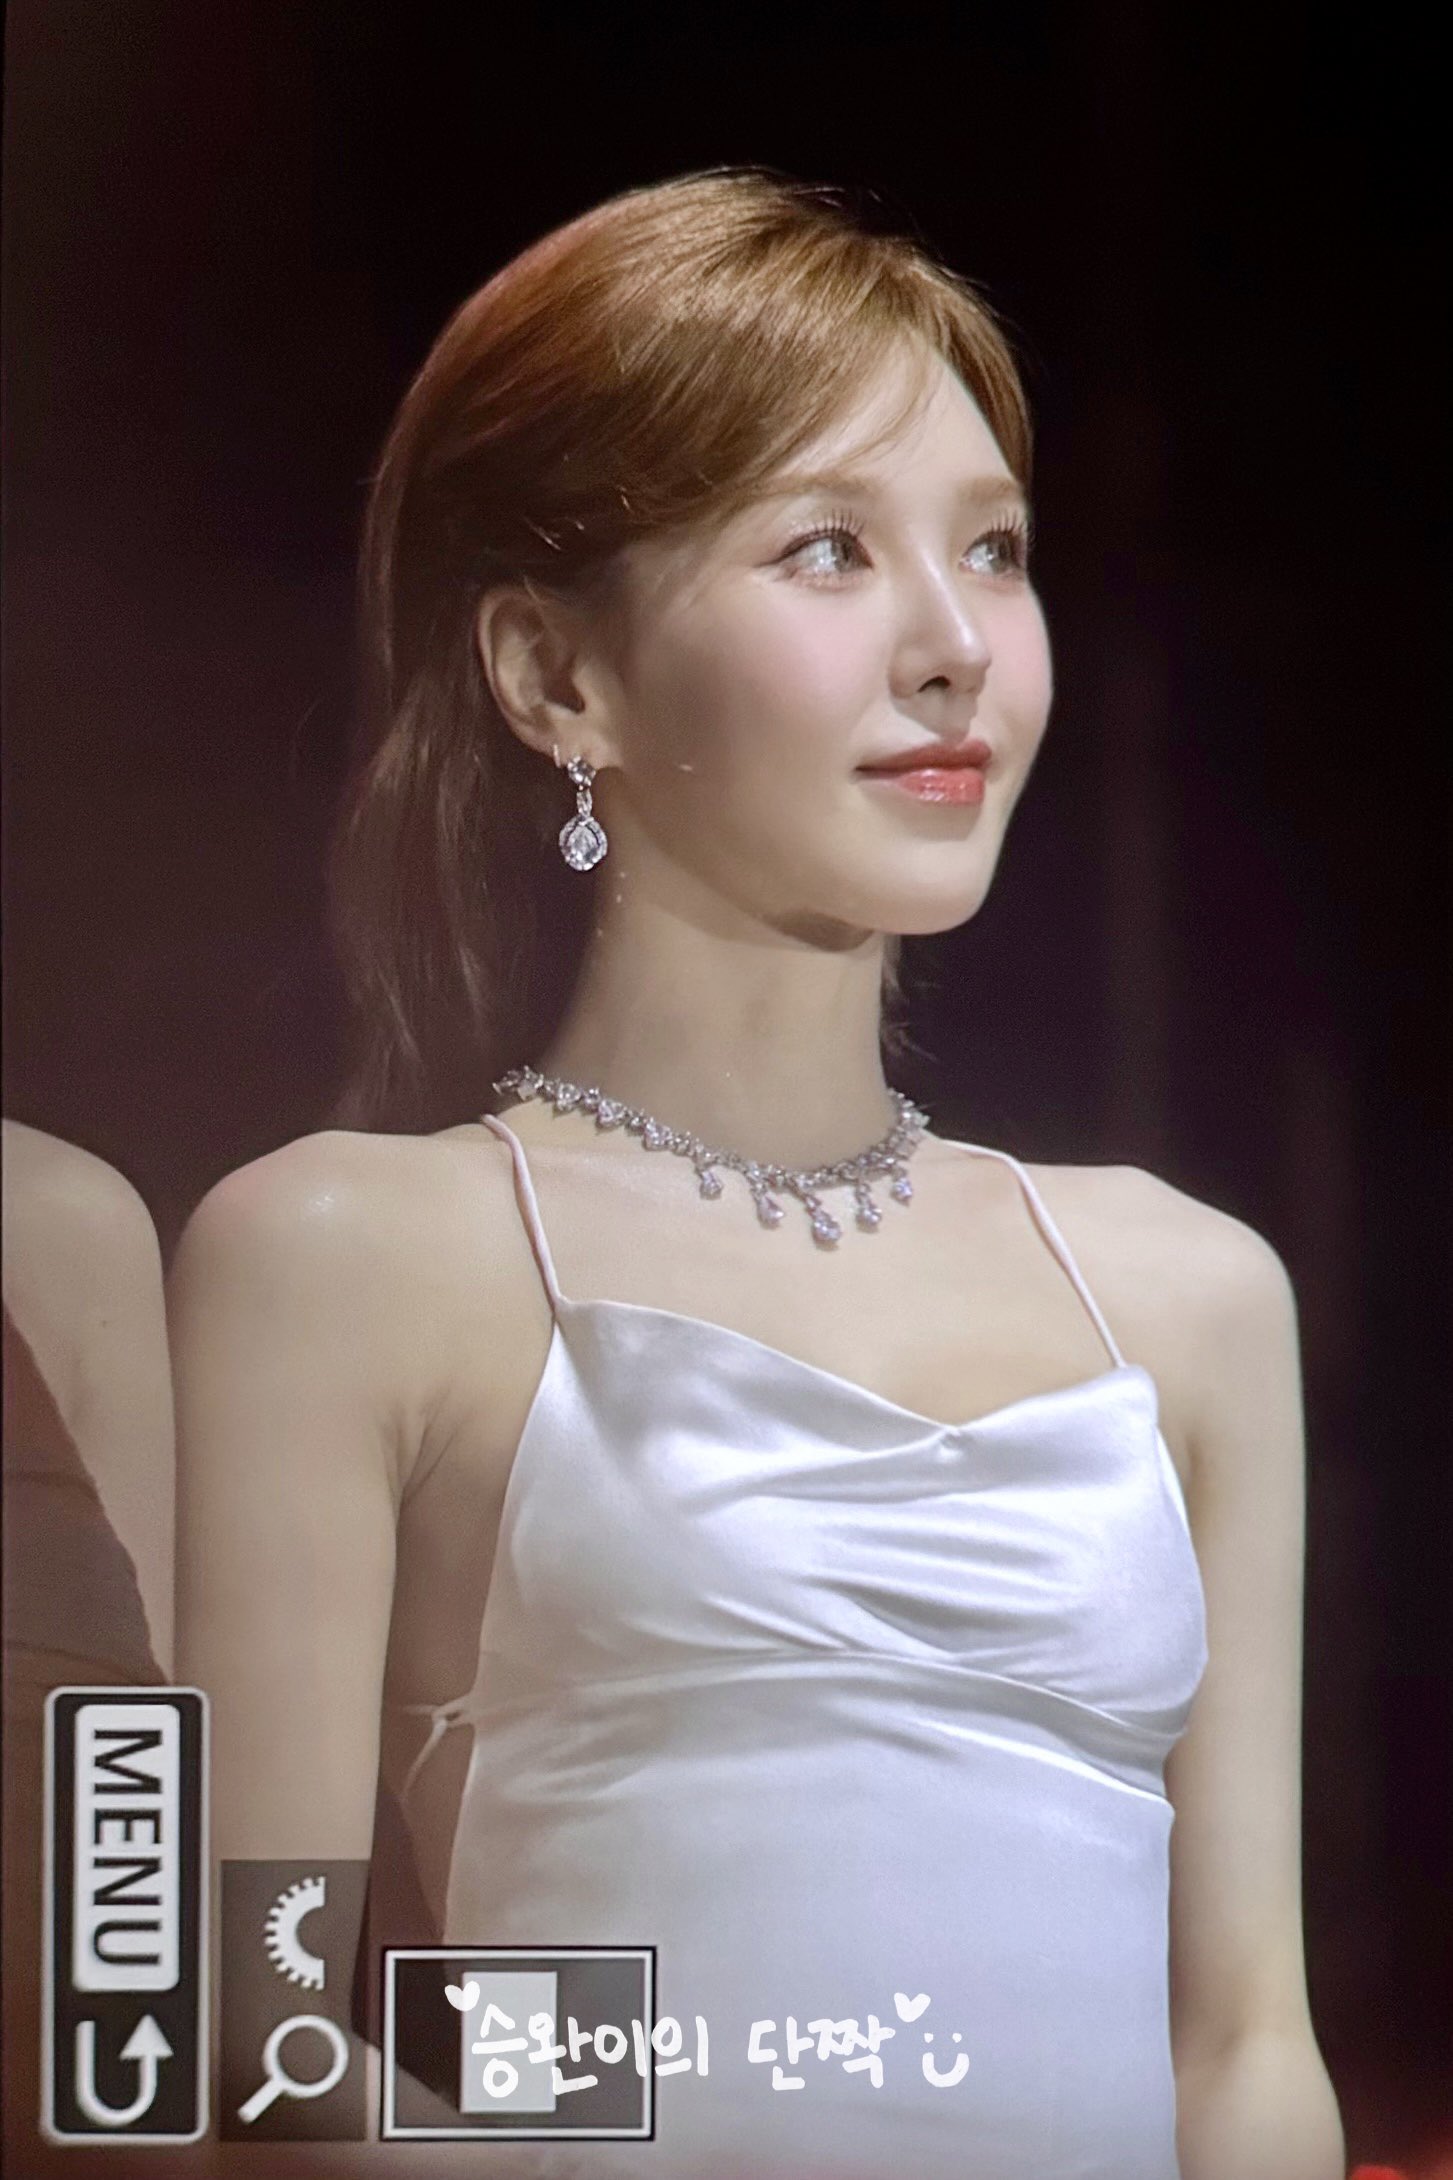 Wendy is so pretty